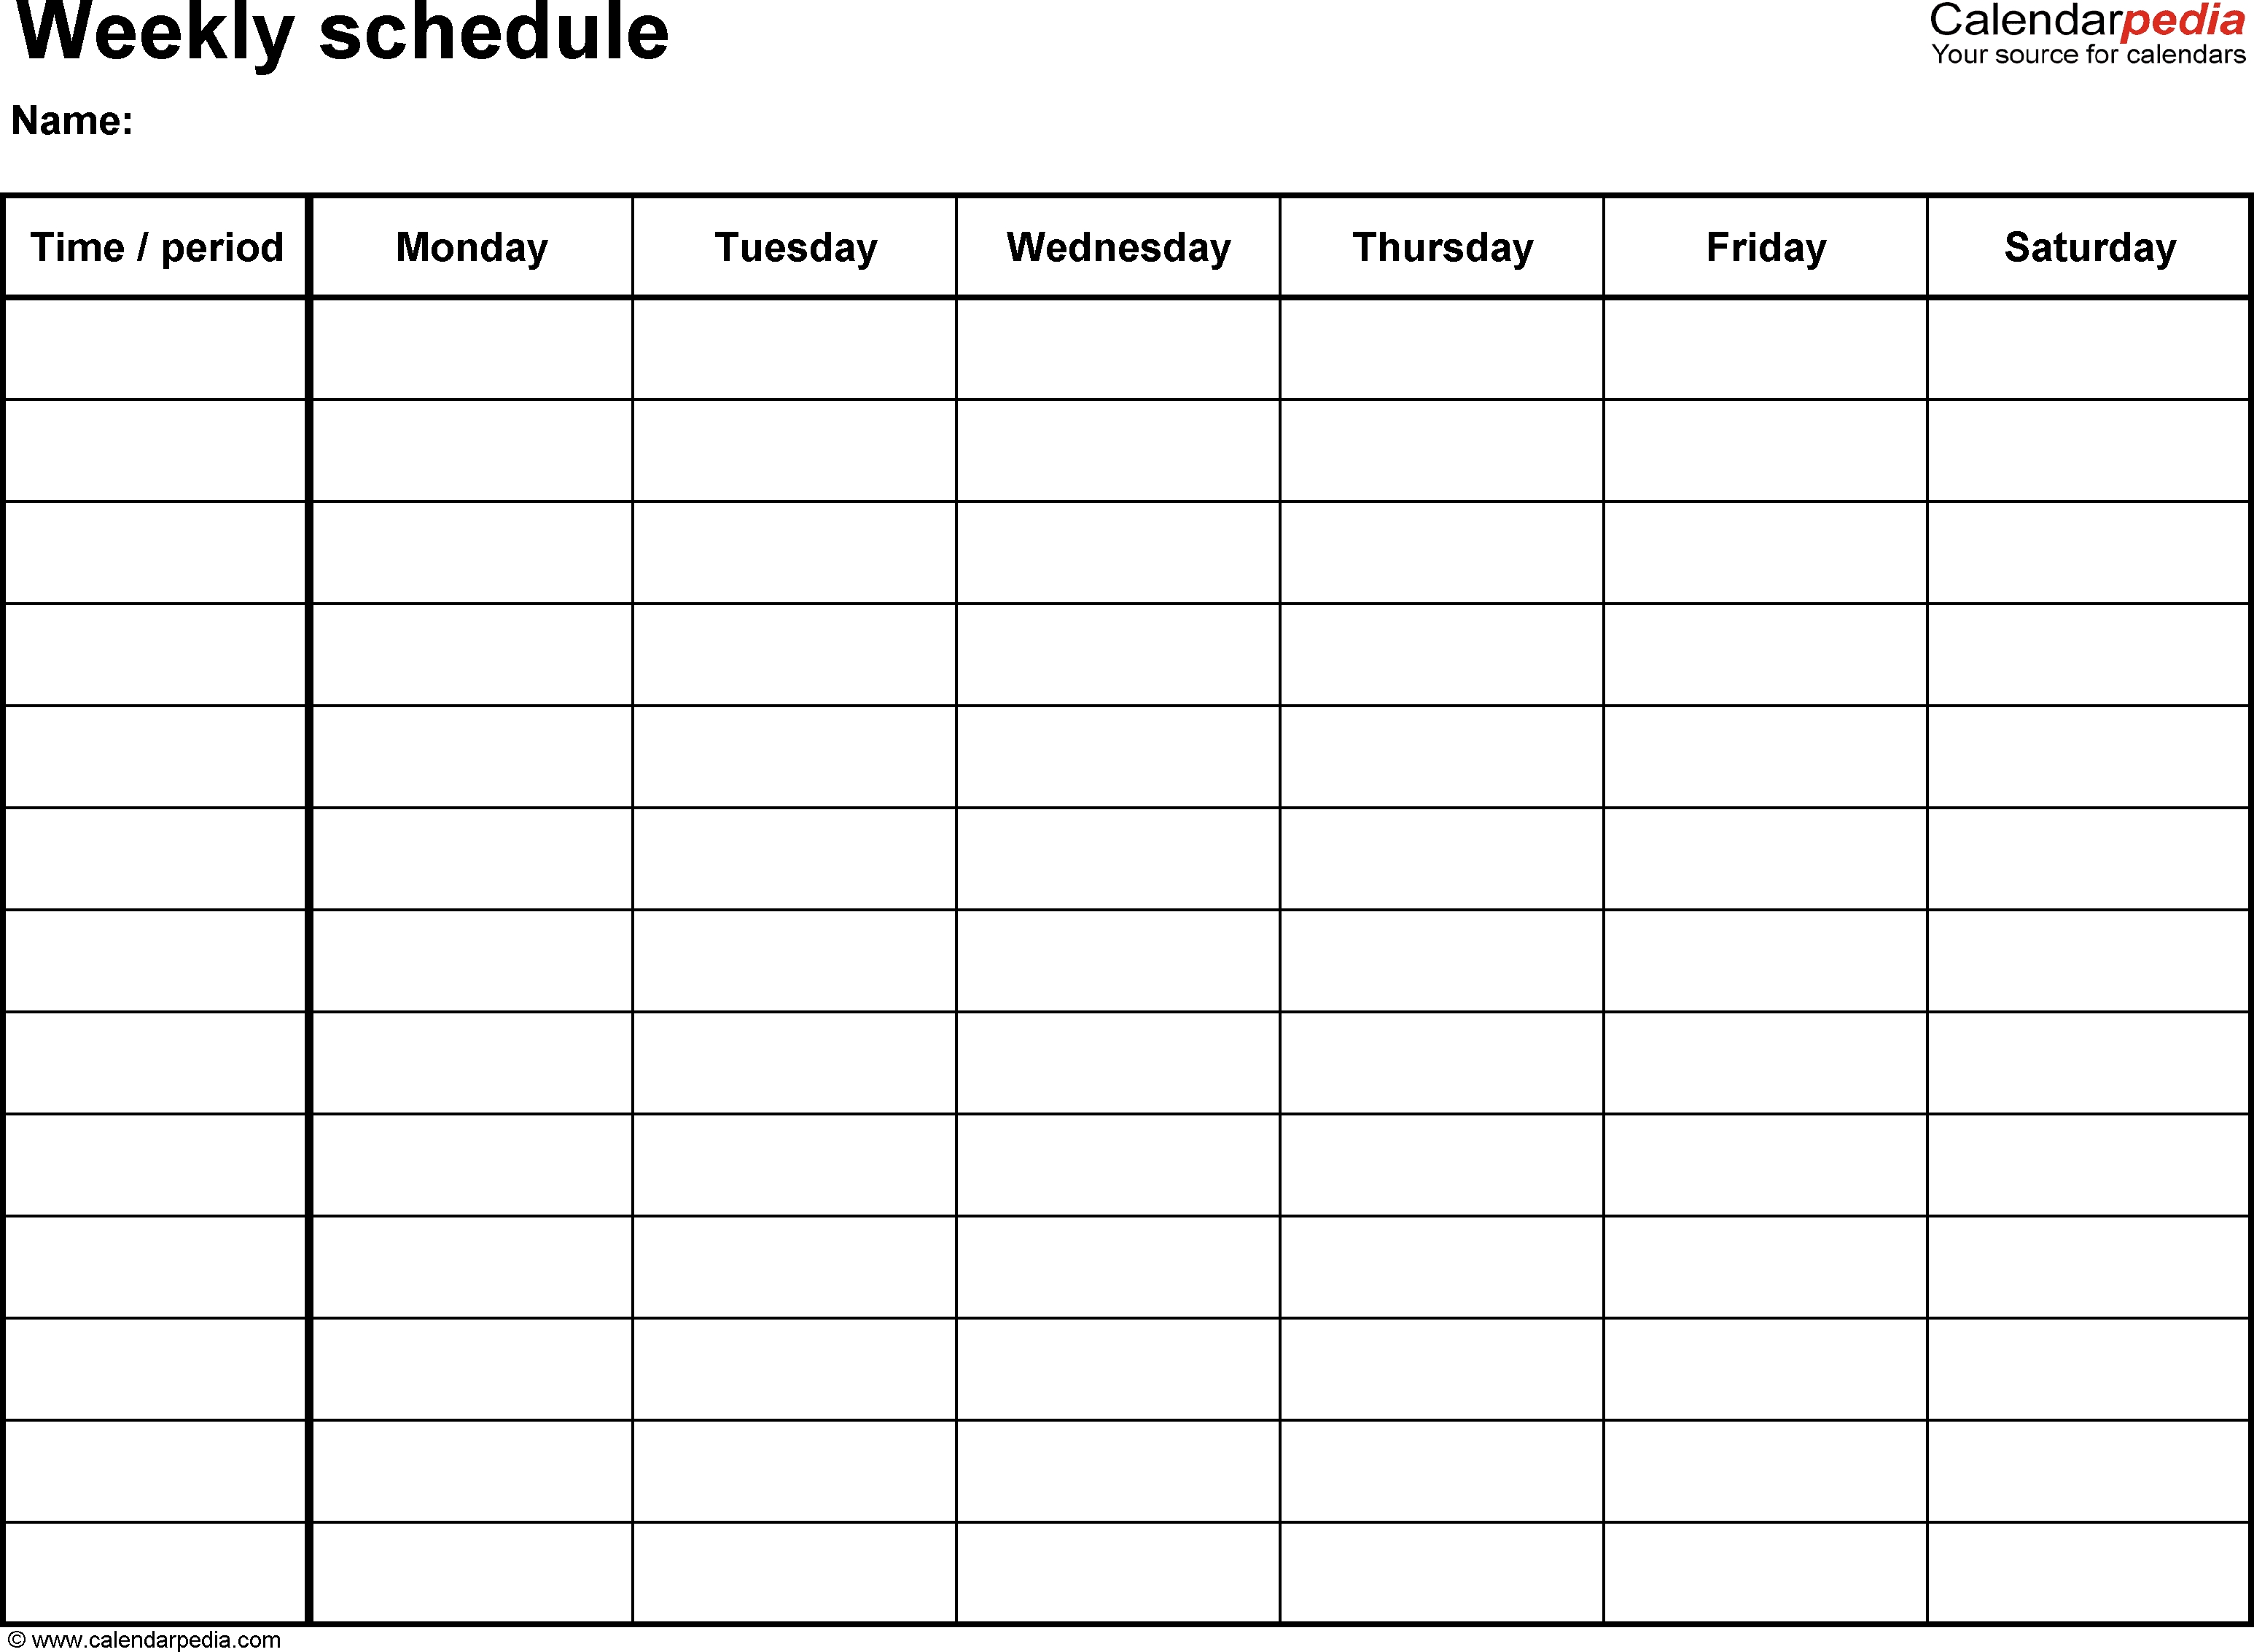 Free Weekly Schedule Templates For Word - 18 Templates-Monday Through Friday Calendar Template